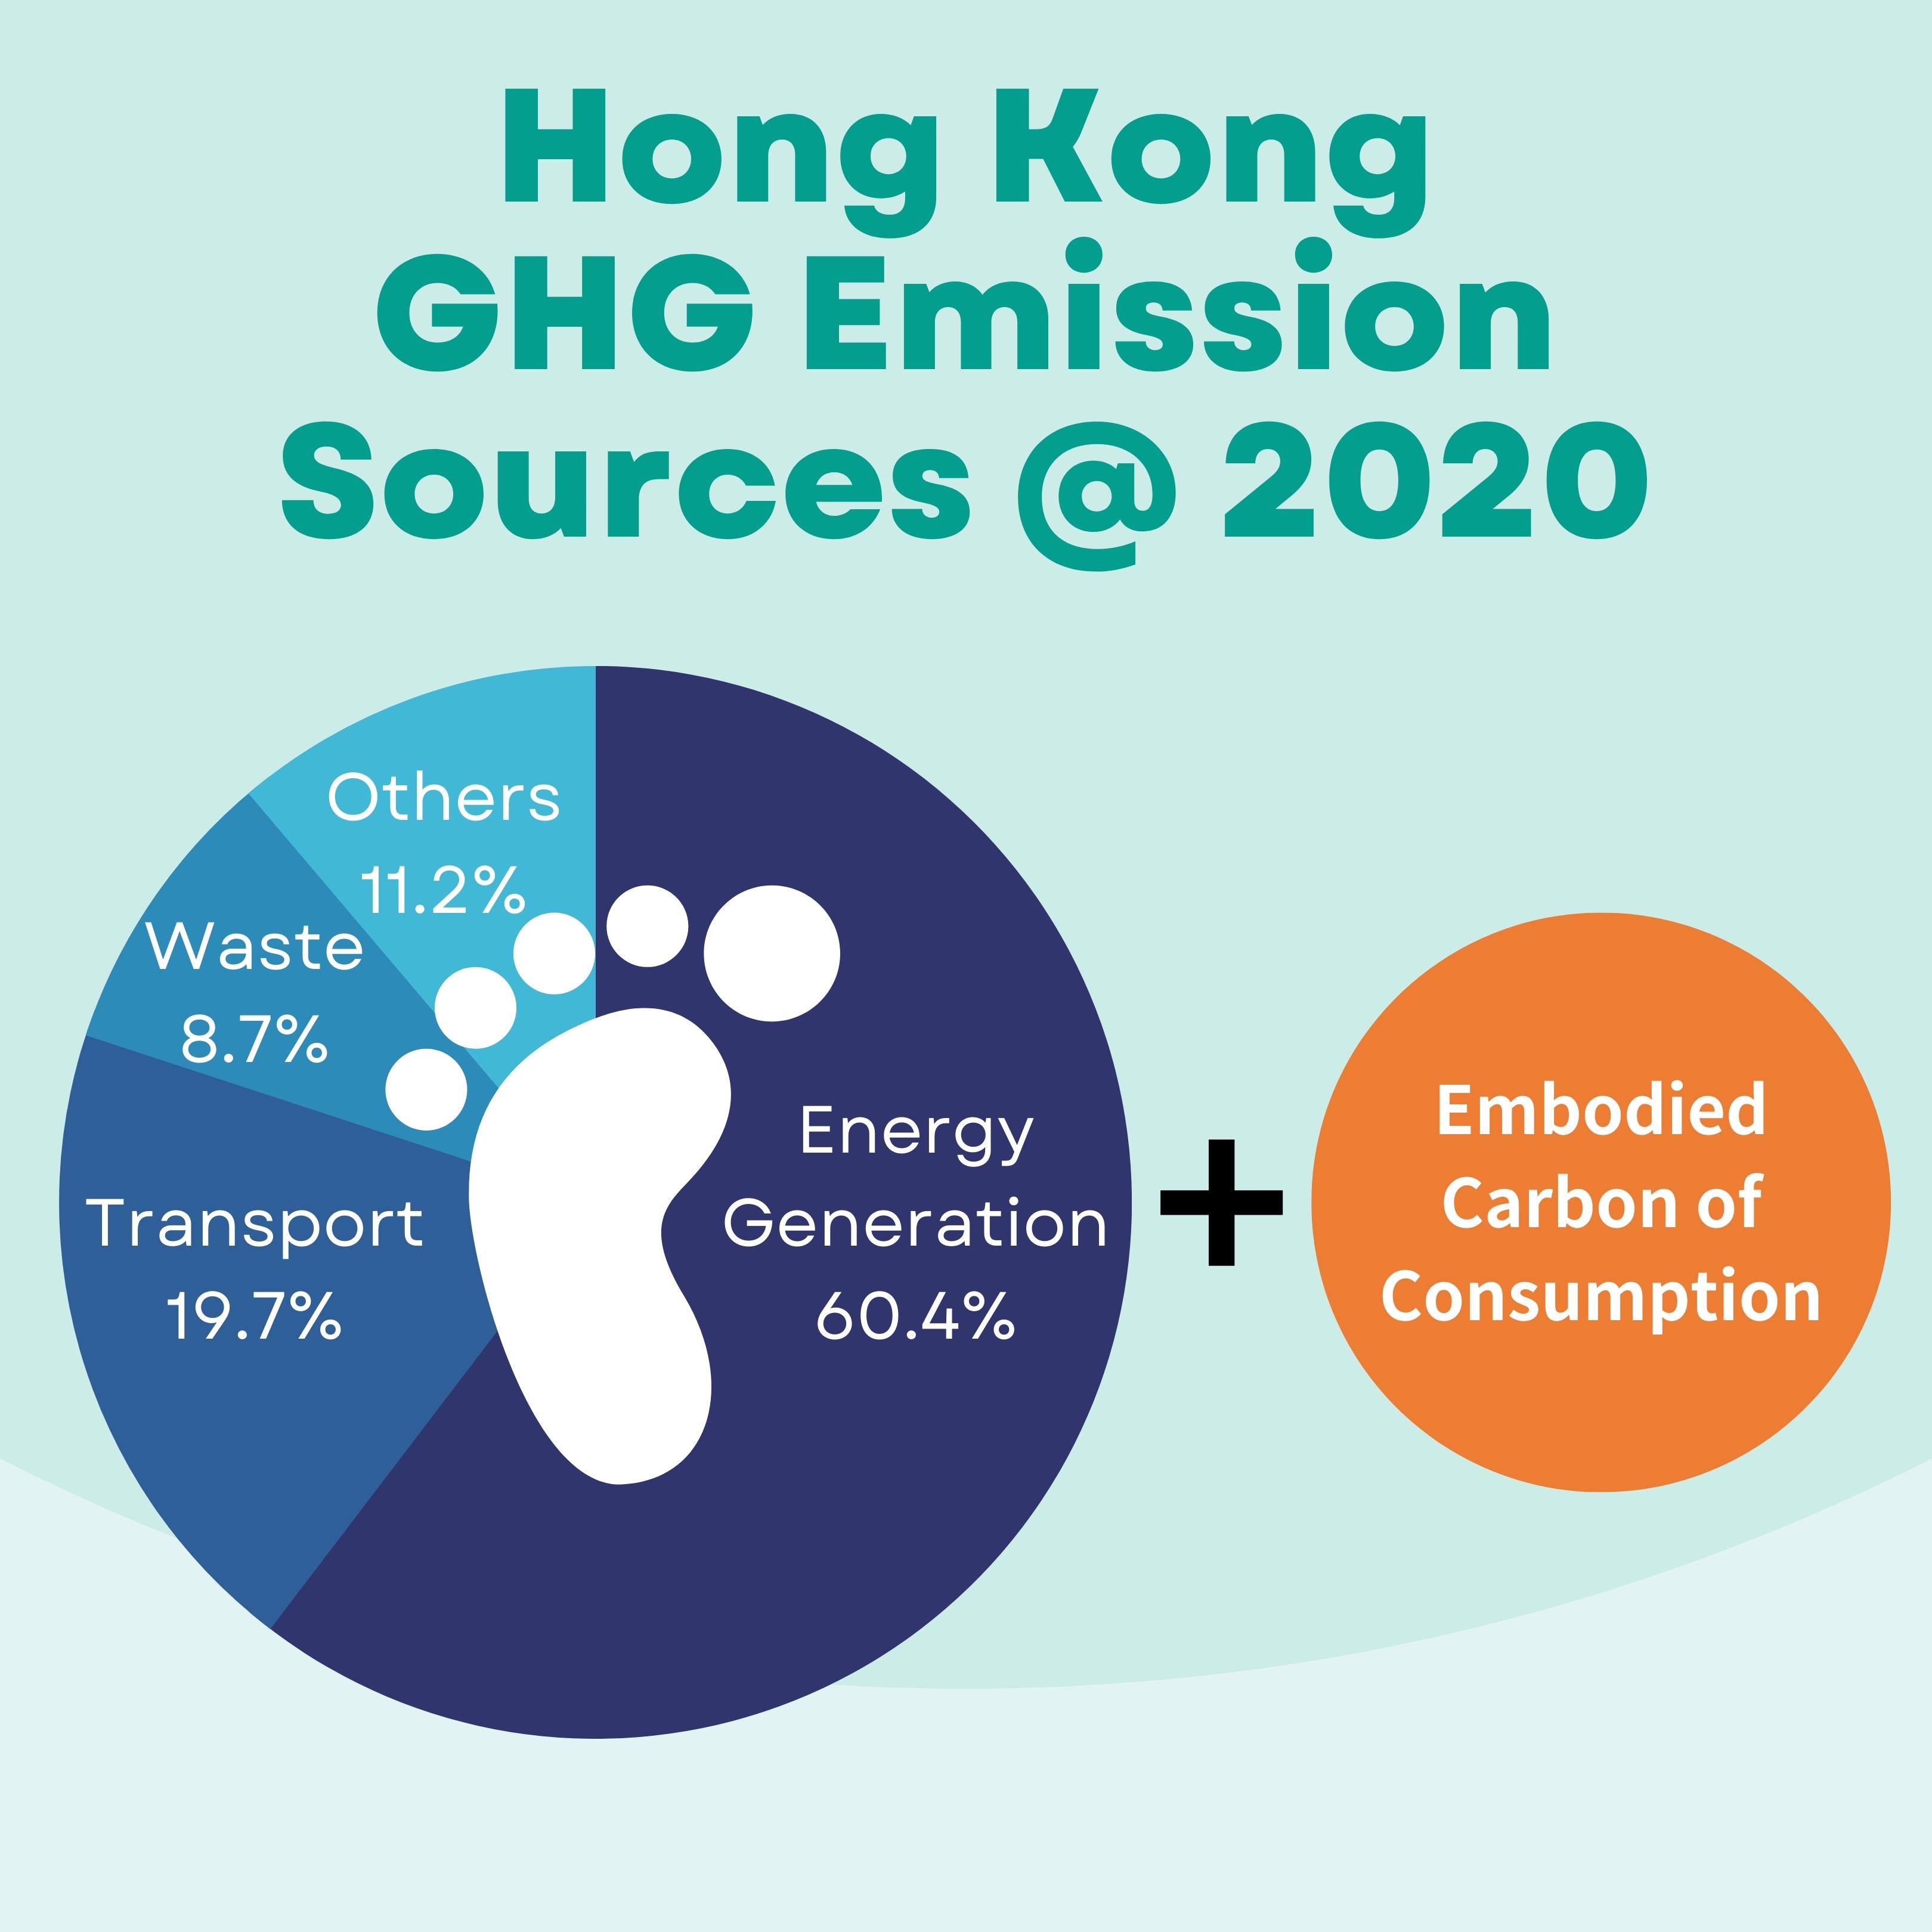 Source: Environmental Protection Department, HKSAR Gov. ; The Green Earth